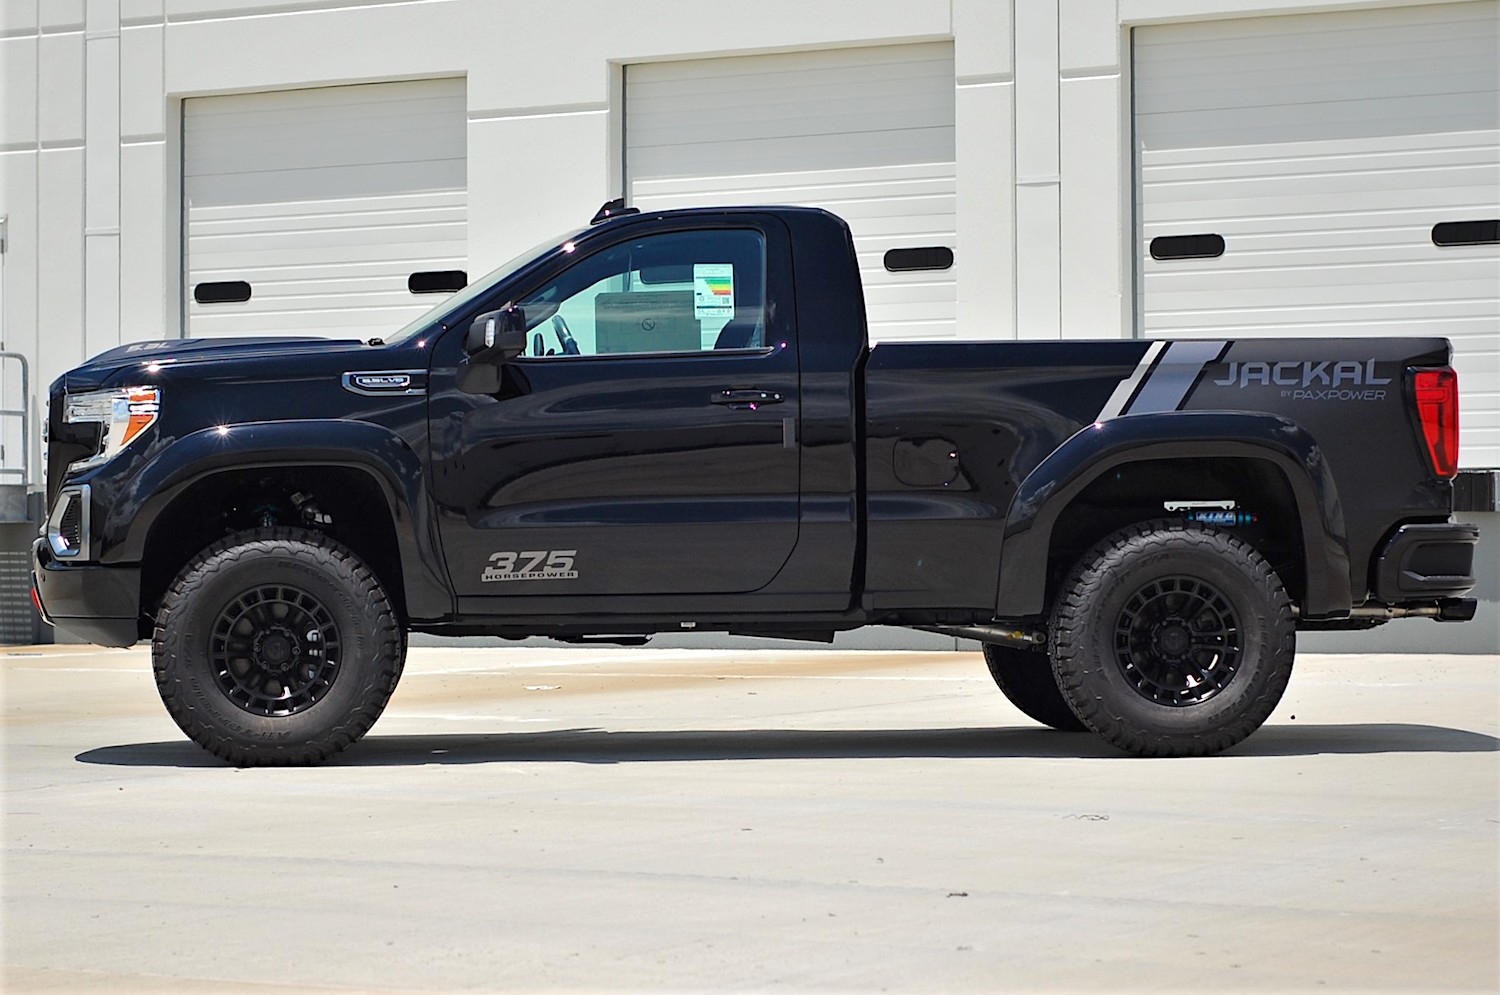 This GMC Sierra Jackal By PaxPower Packs a Widebody Kit with King